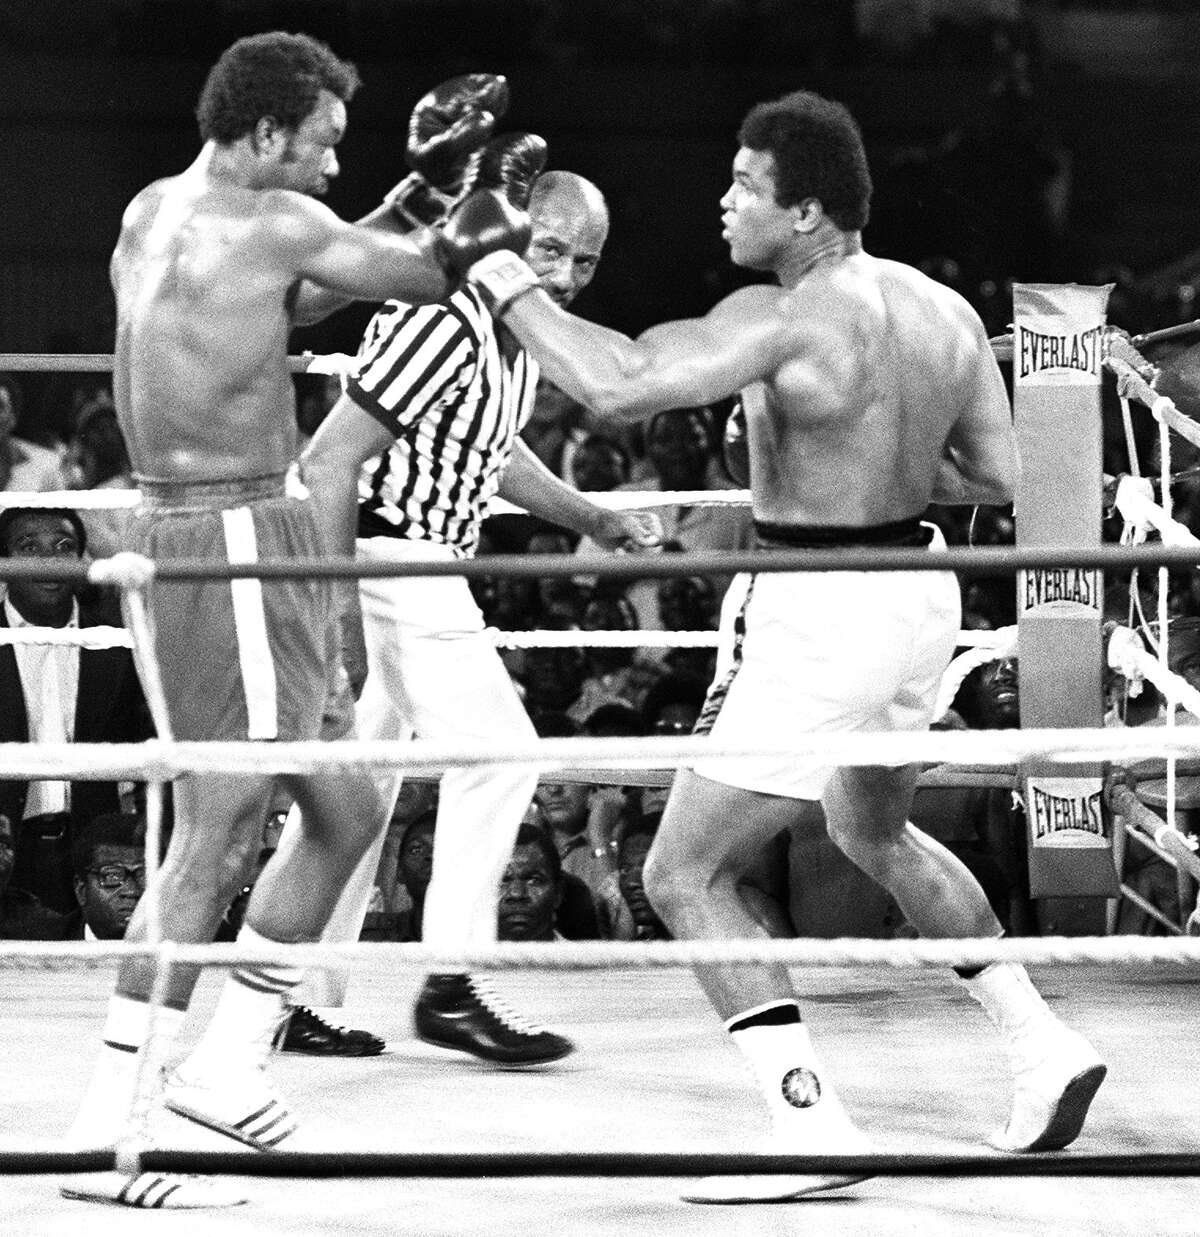 (FILES) This file photo taken on October 30, 1974 shows the fight opposing former world heavyweight boxing champion the American Muhammad Ali (R) and his compatriot and titleholder George Foreman (L) in Kinshasa. Ali won and got back his title. Boxing icon Muhammad Ali died on Friday, June 3, a family spokesman said in a statement. "After a 32-year battle with Parkinsons disease, Muhammad Ali has passed away at the age of 74," spokesman Bob Gunnell said. / AFP PHOTO / --/AFP/Getty Images